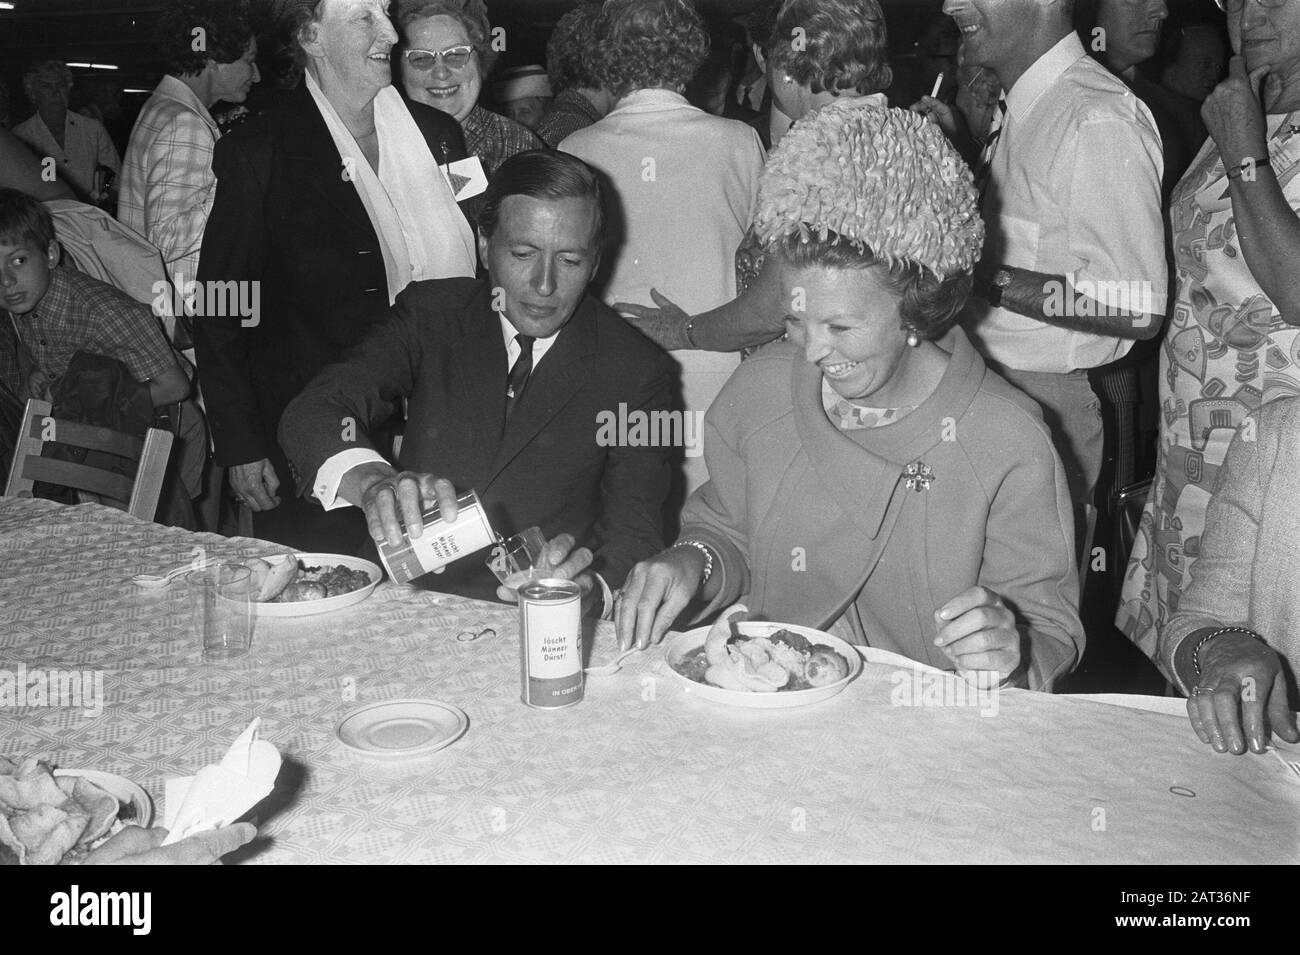 Commemoration due to the end of war 25 years Z-O-Asia, in Congresgebouw The Hague, with Beatrix and Claus; Beatrix and Claus eat nasi Date: August 15, 1970 Location: The Hague, Zuid-Holland Keywords: commemorations Personal name: Beatrix, princess, Claus, prince Stock Photo